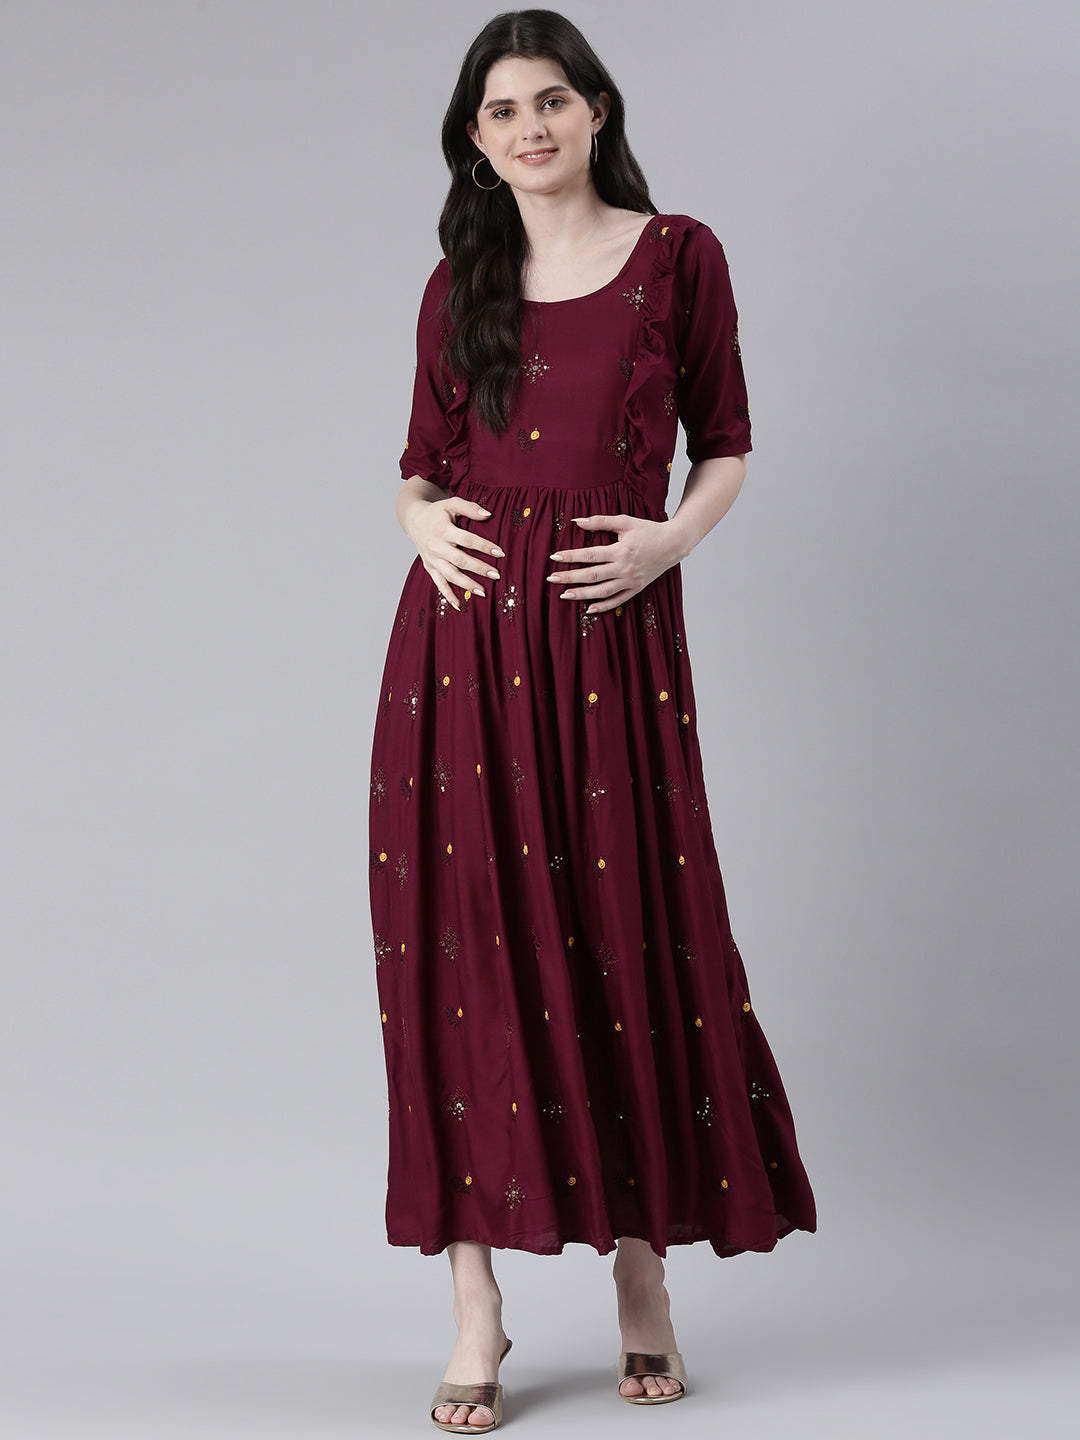 Maroon Embellished Embroidered Ruffled Maternity Fit & Flare Maxi Ethnic Dress